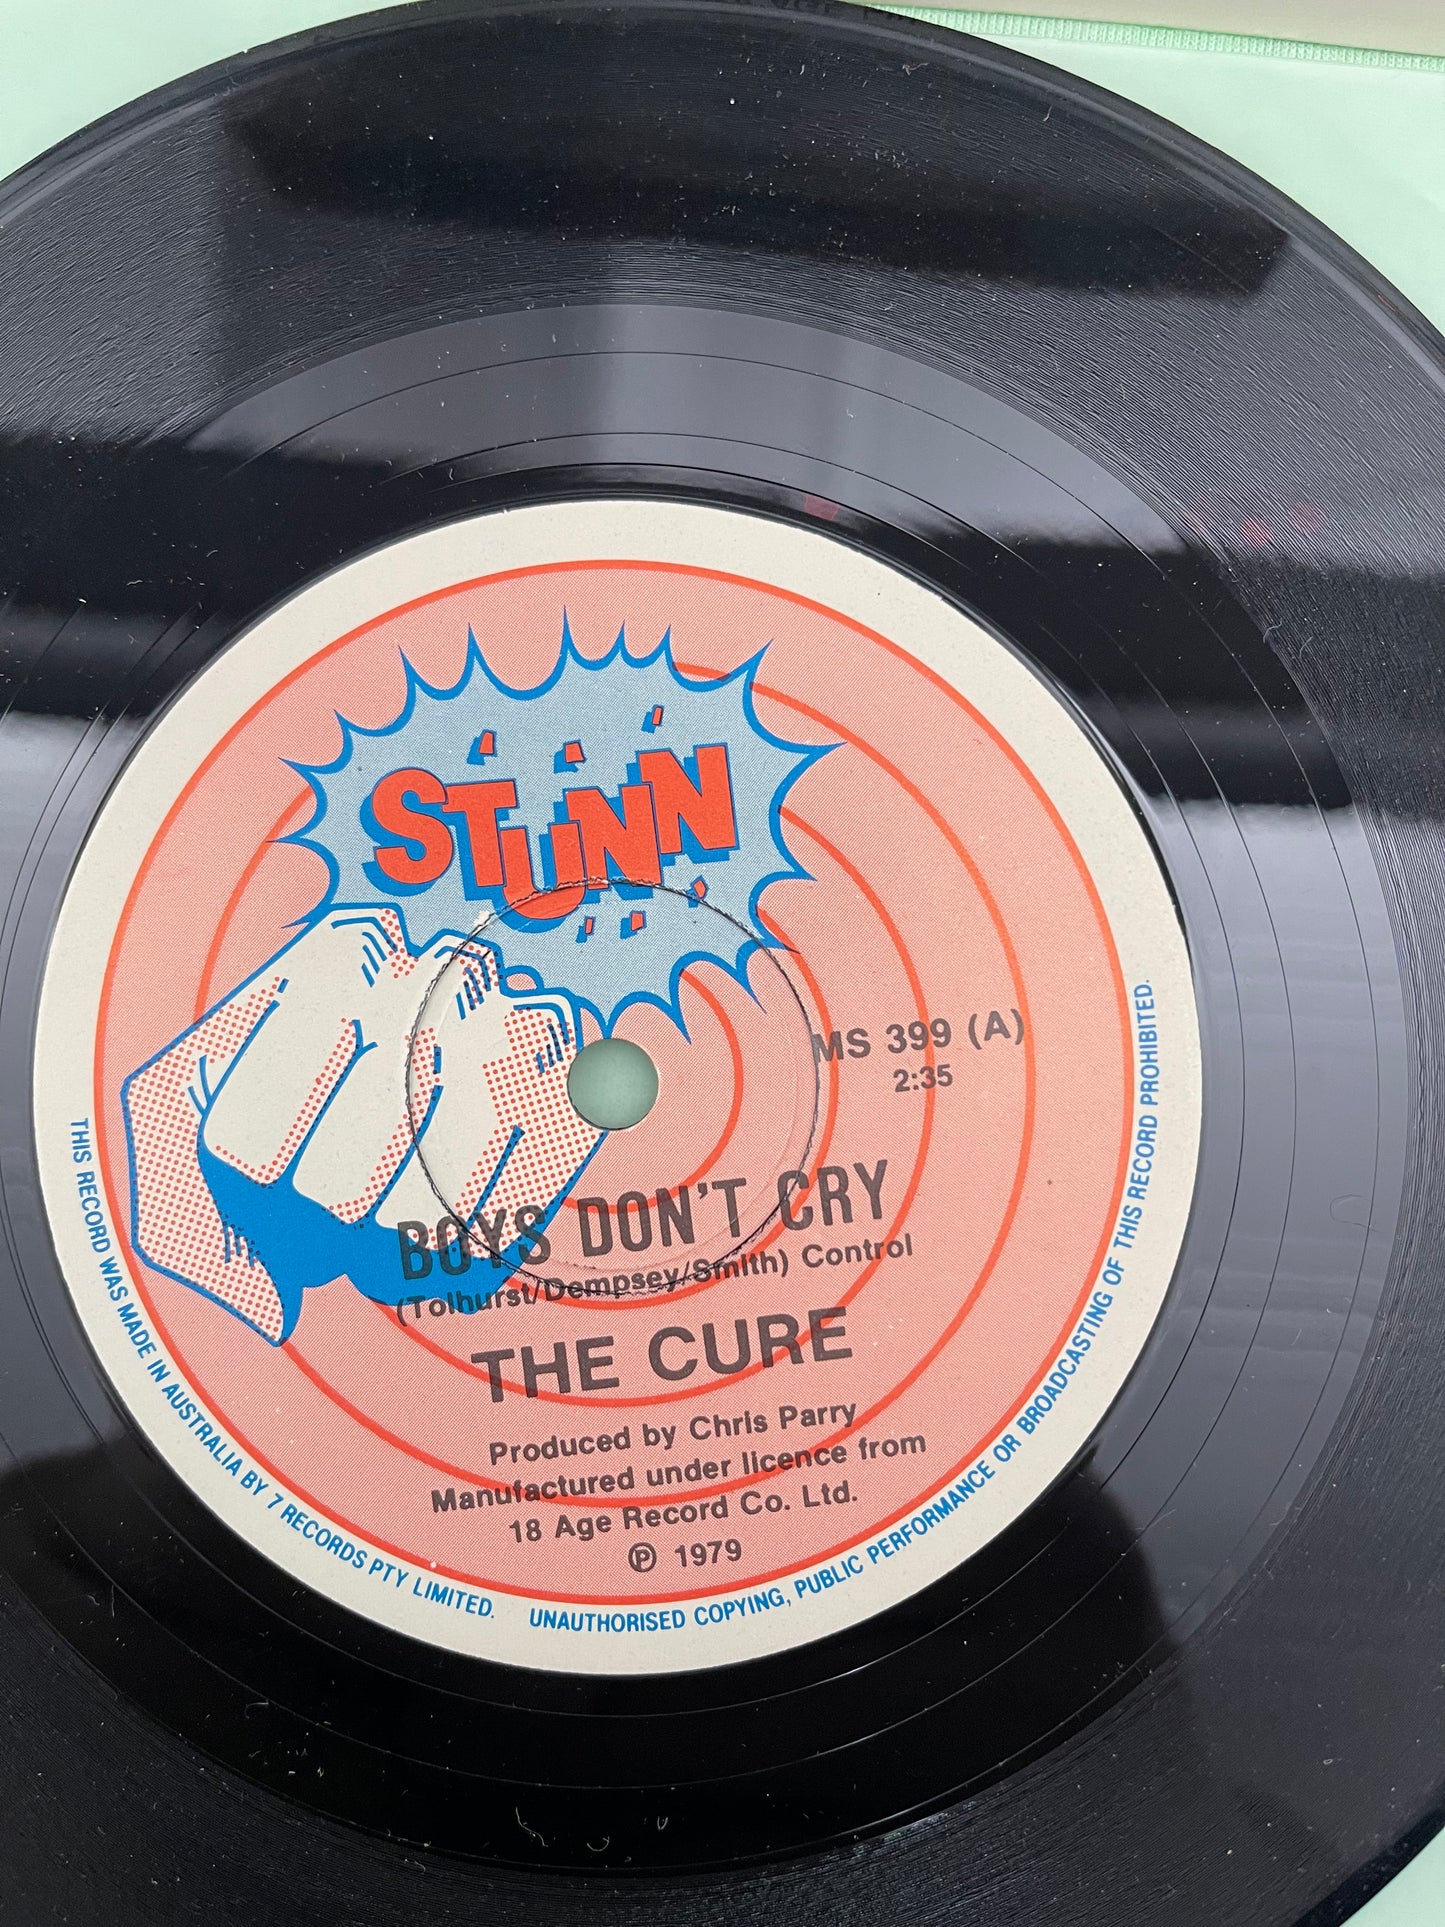 The Cure - Boys Don’t Cry 7” (1979 Australian Pressing)